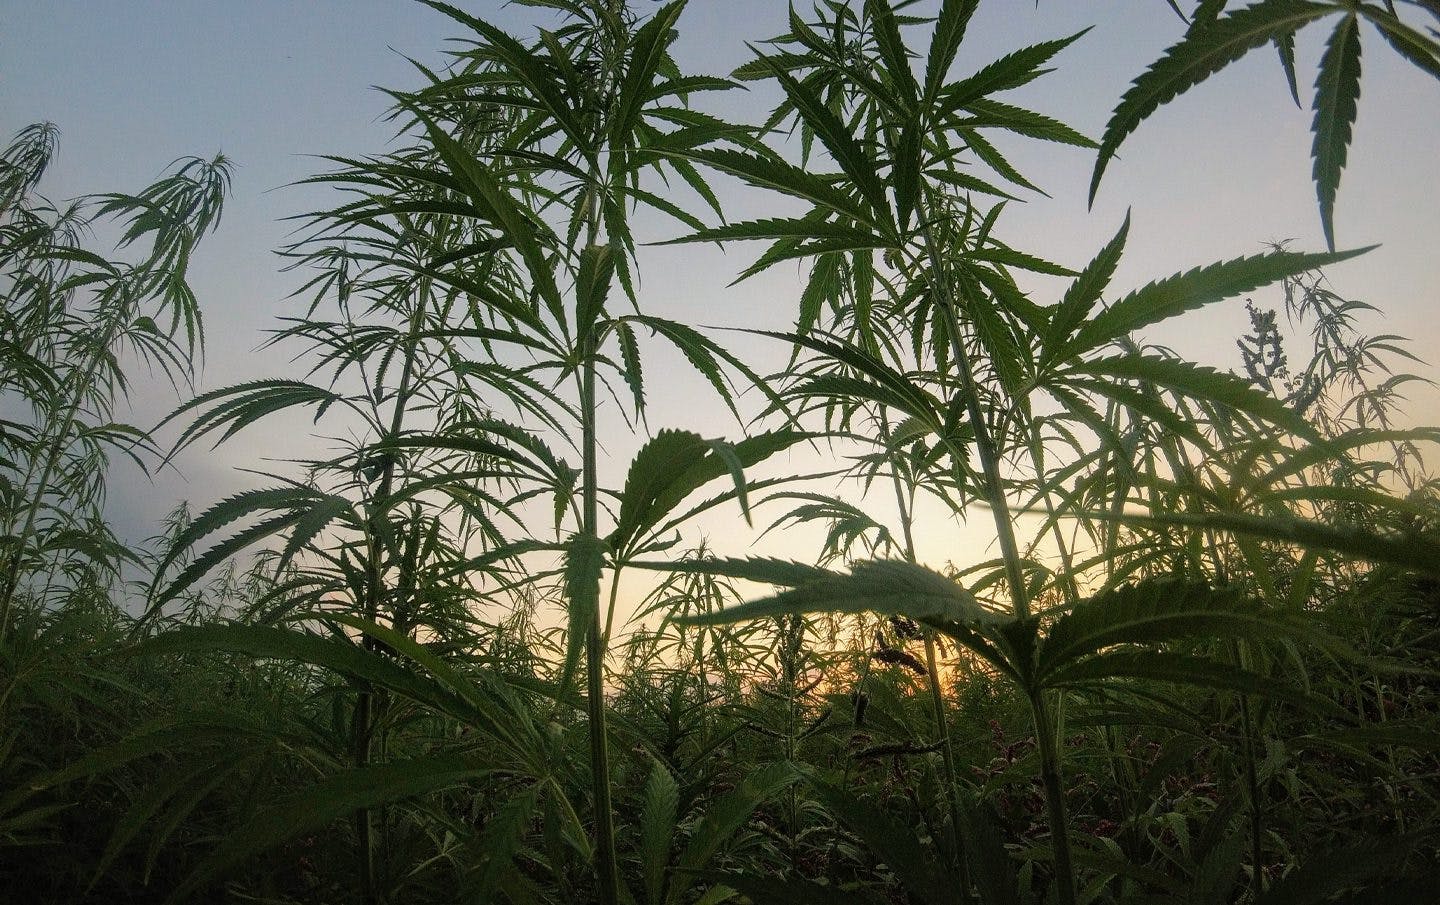 Cannabis cultivation and its carbon footprint